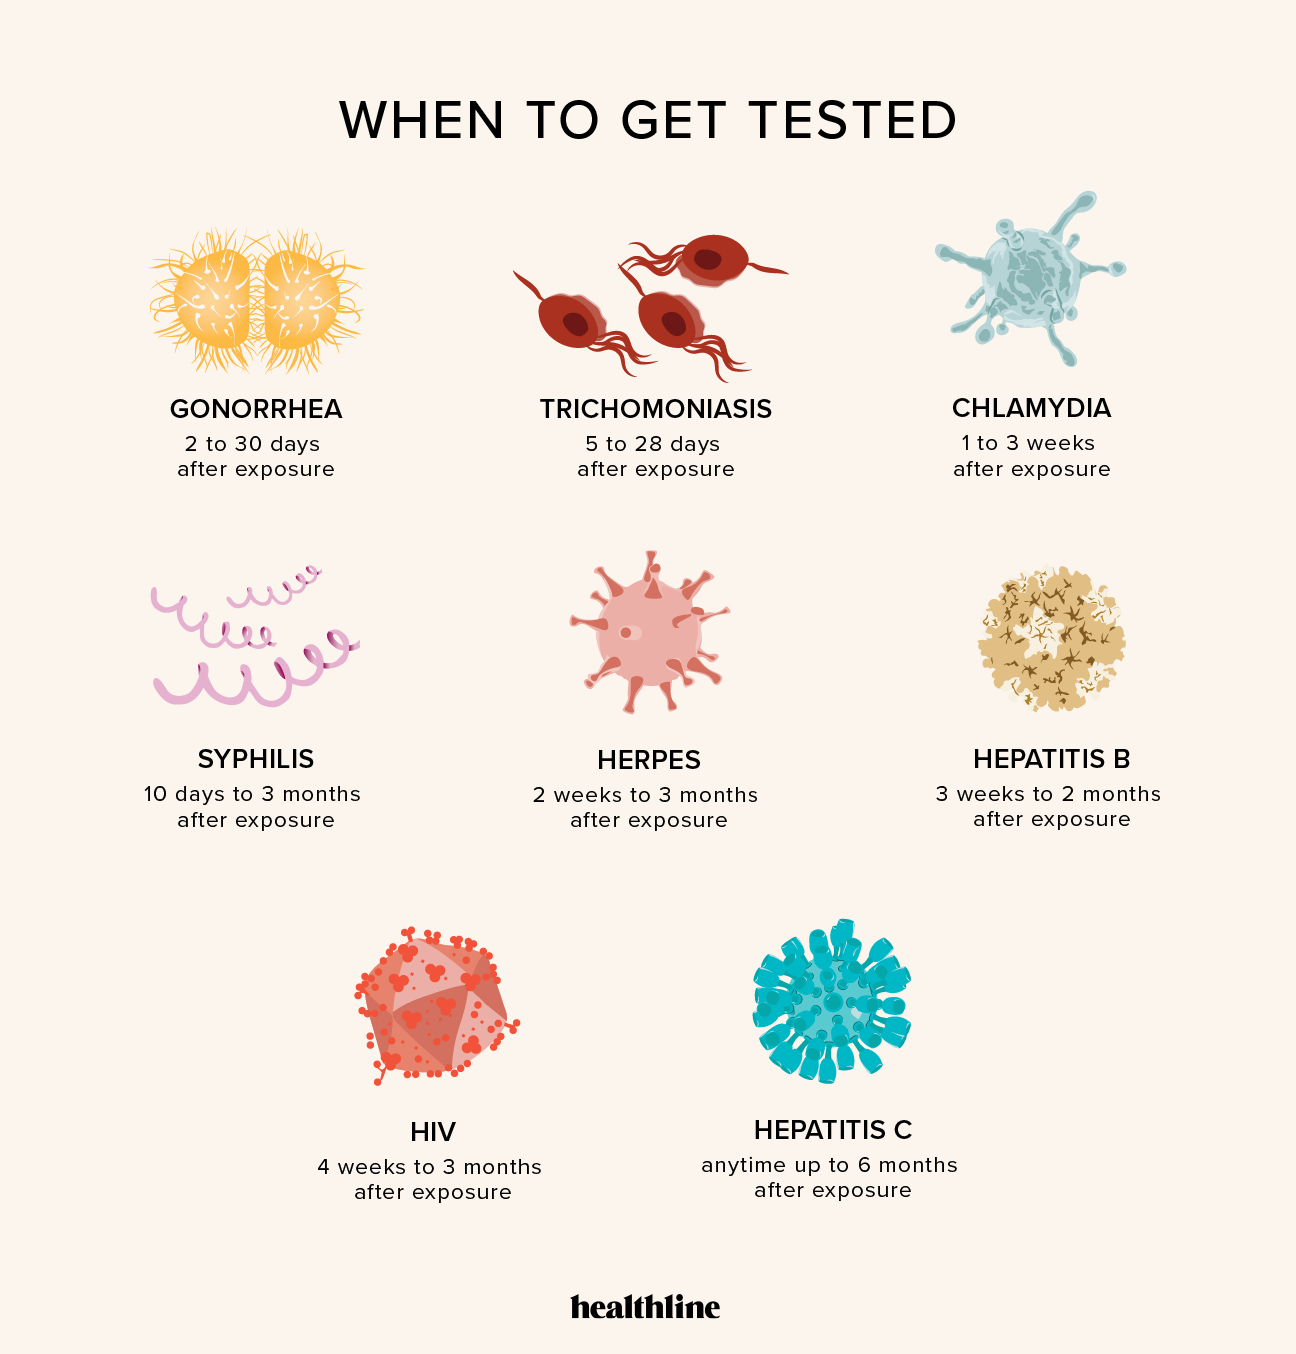 How to Find Free or Low-Cost STI Testing Near You and What to Expect